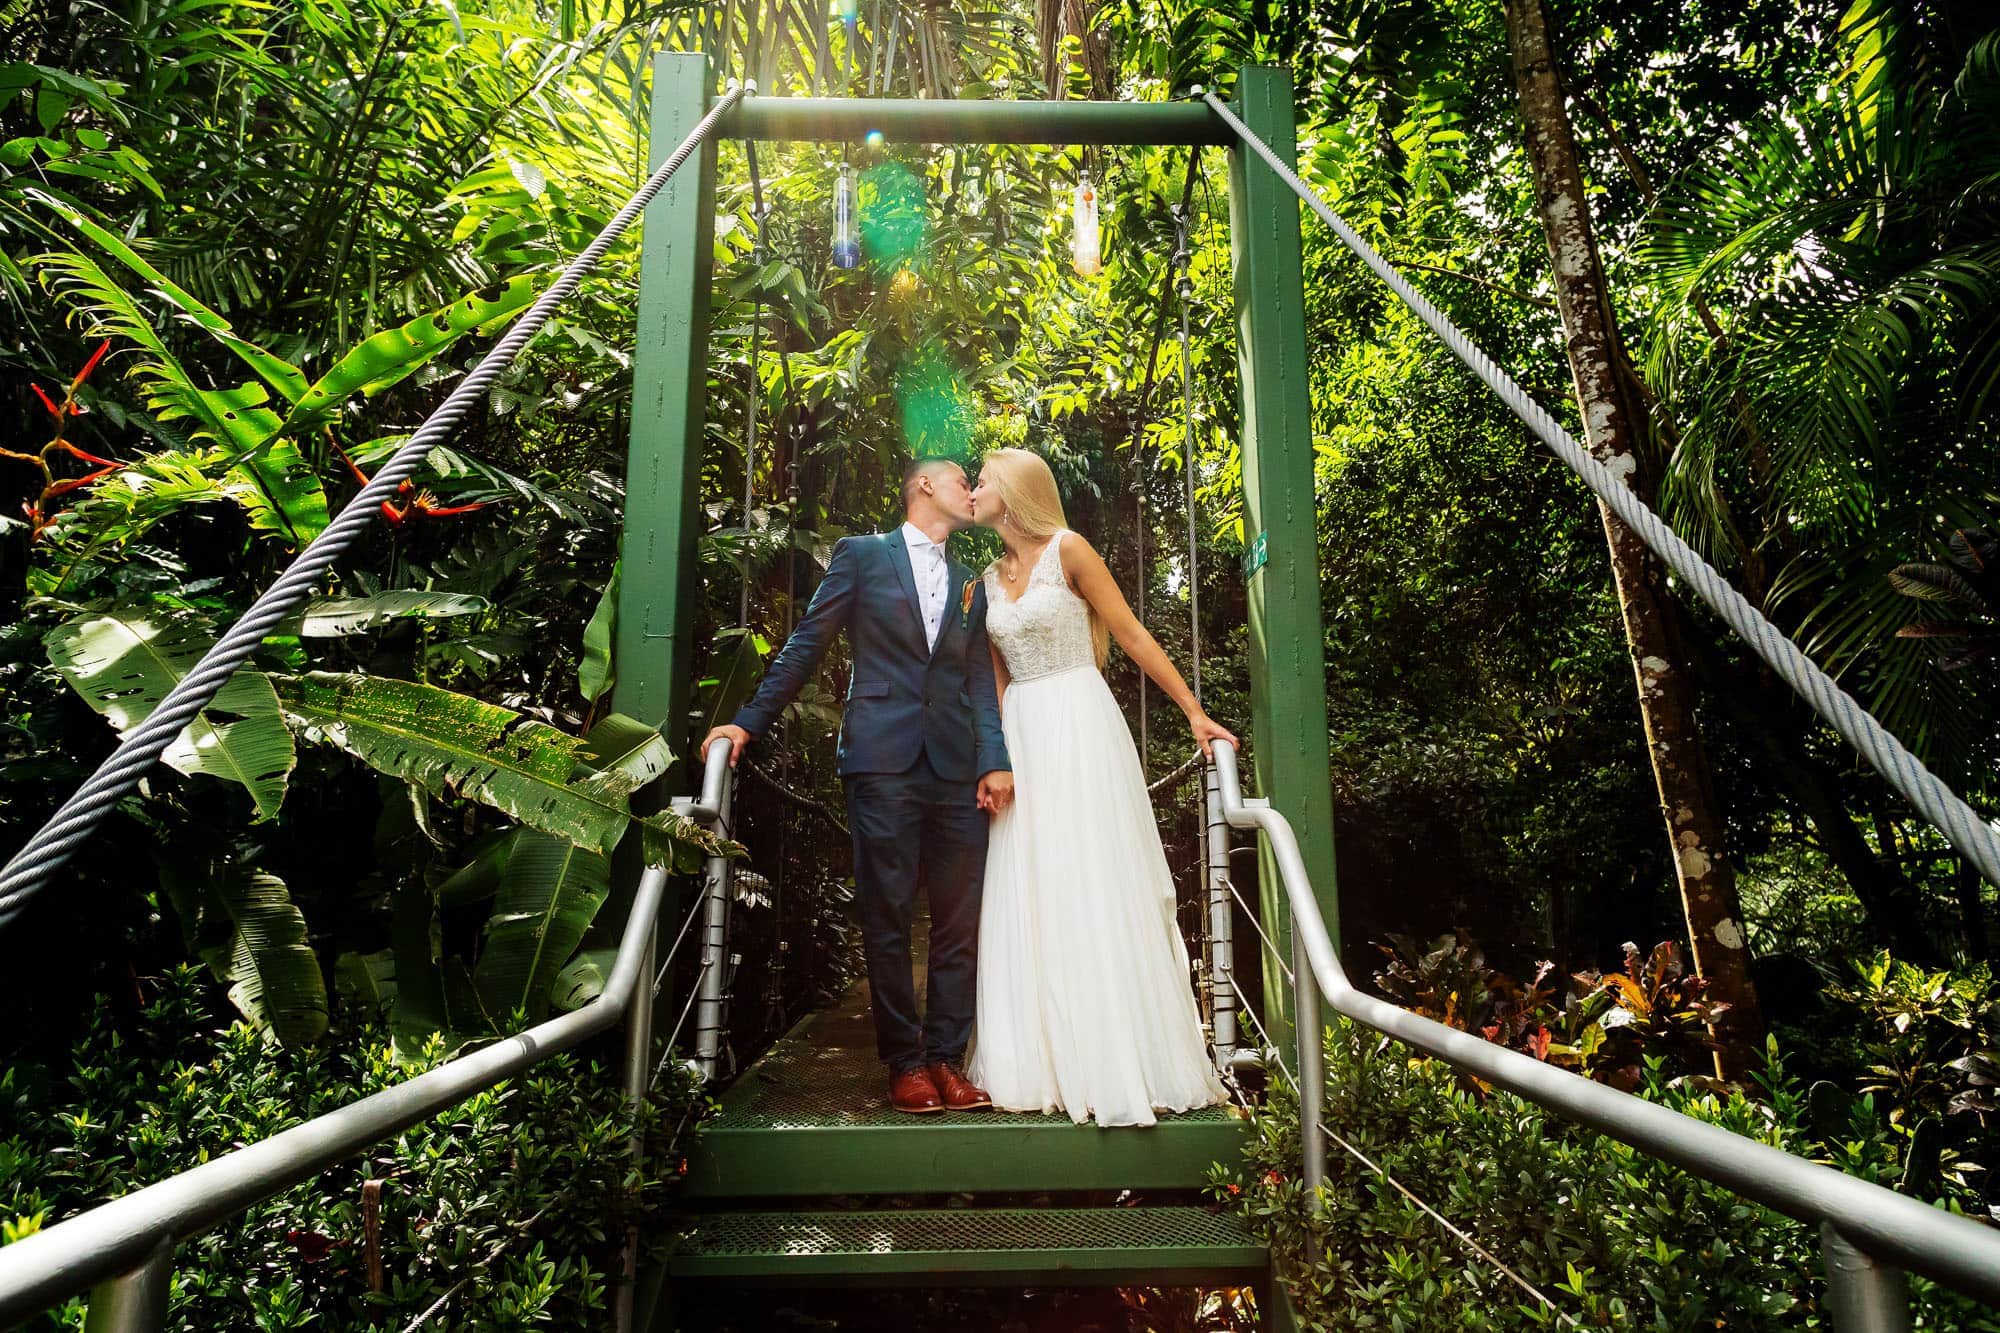 Sharing a kiss on the suspension bridge at Costa Verde